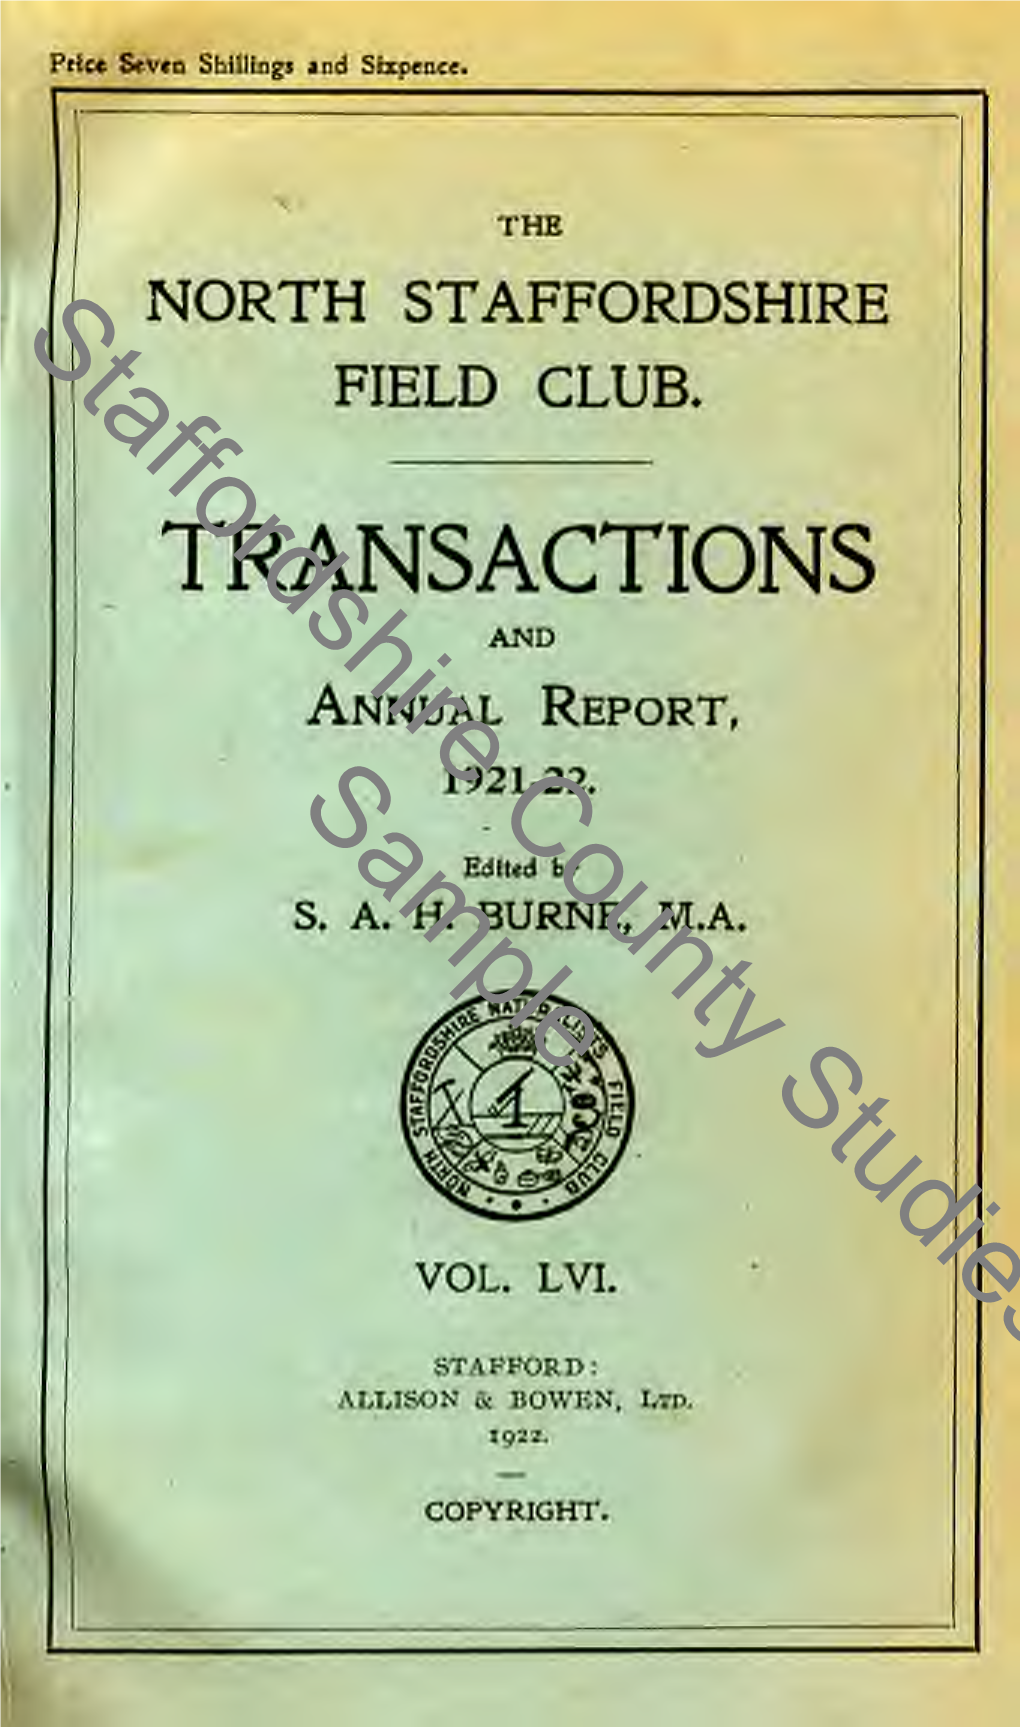 North Staffordshire Field Club, Transactions and Annual Report